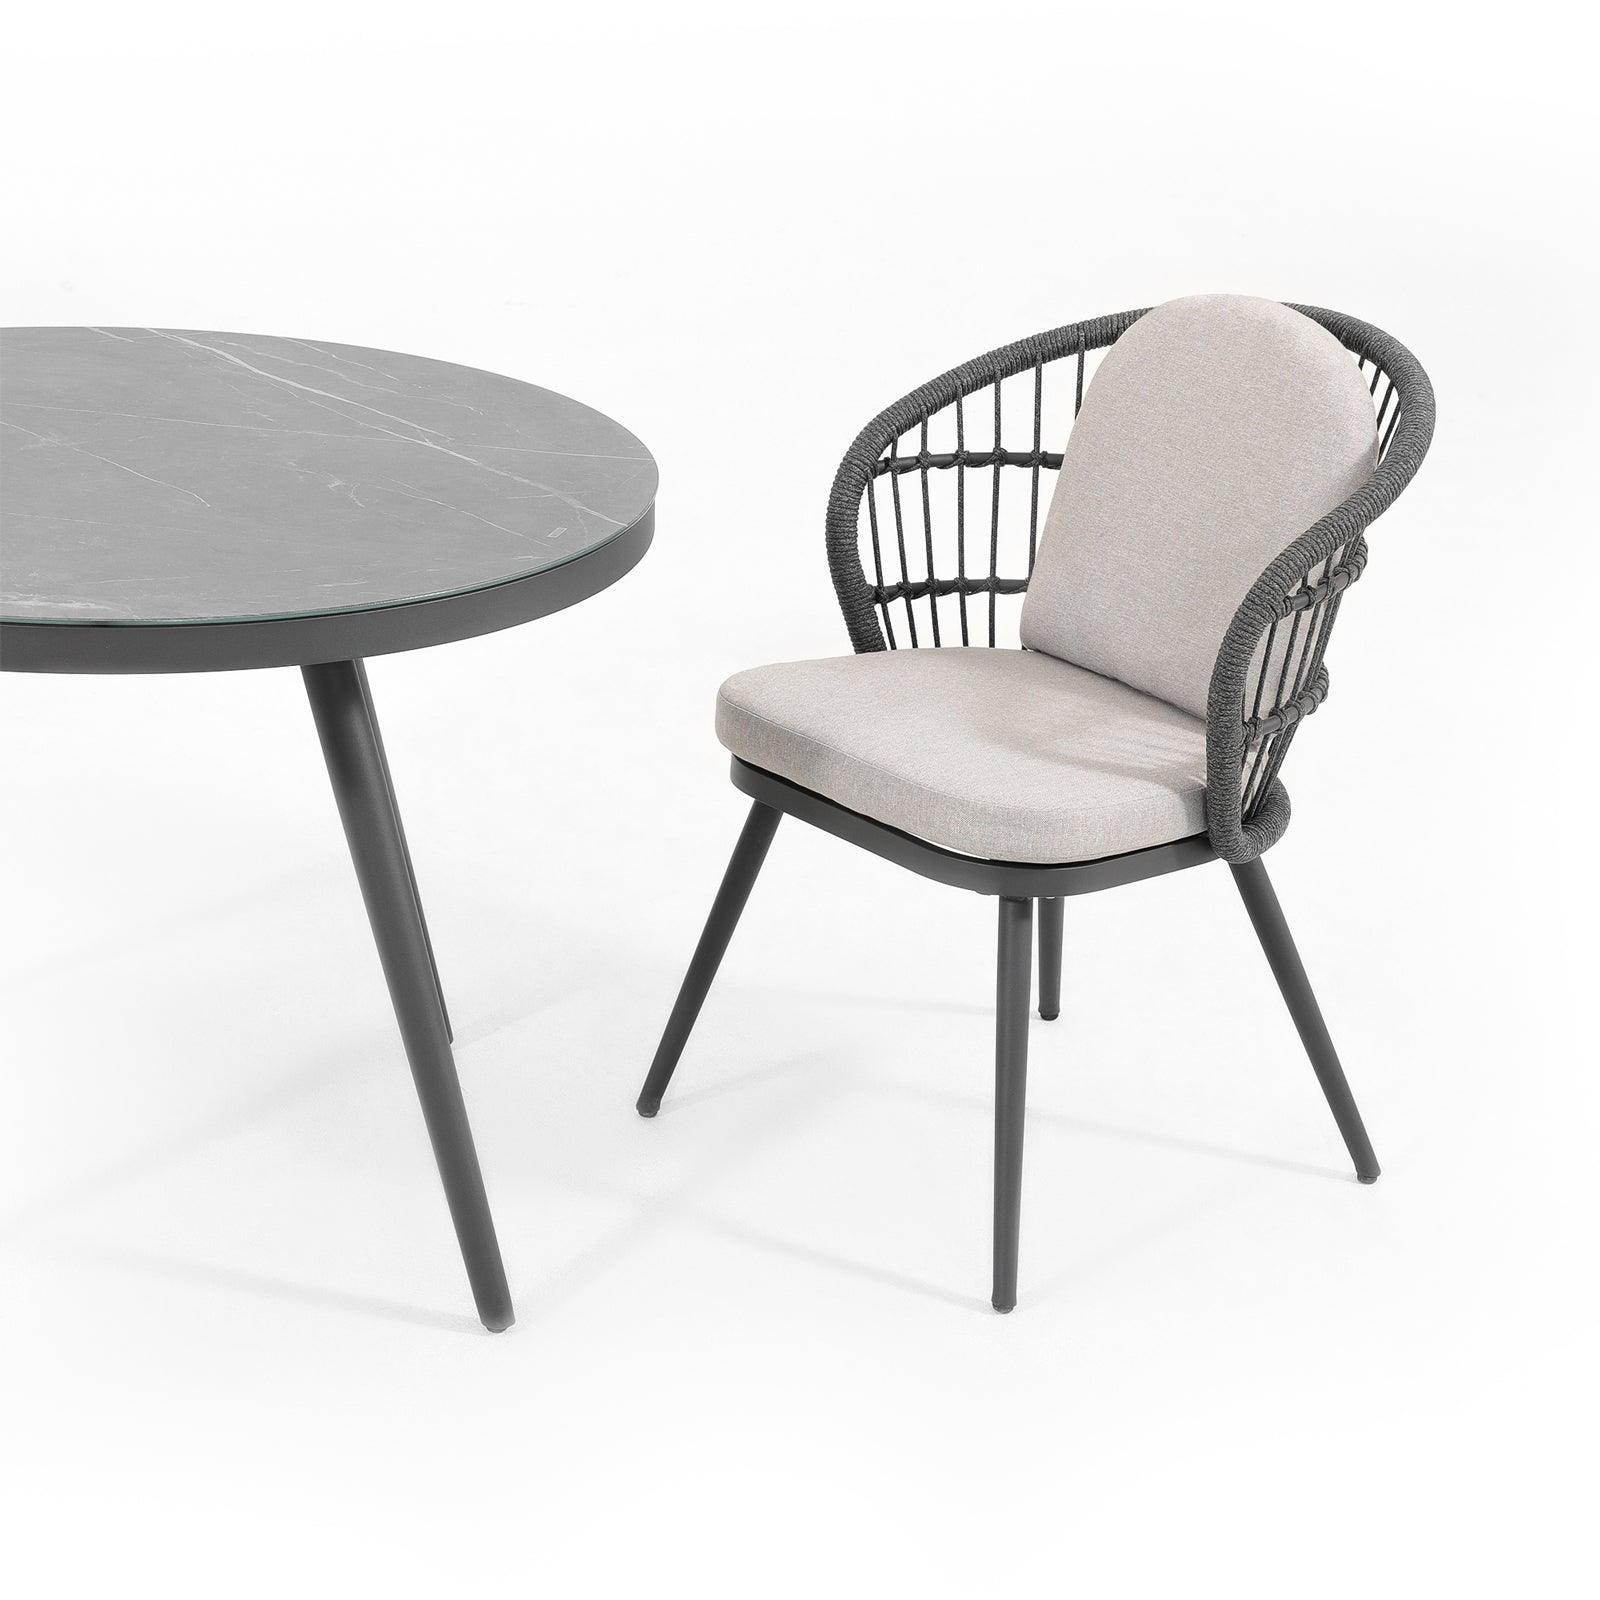 Comino dark grey outdoor dining chairs with aluminum frame and rope design, light grey cushions, left view- Jardina Furniture